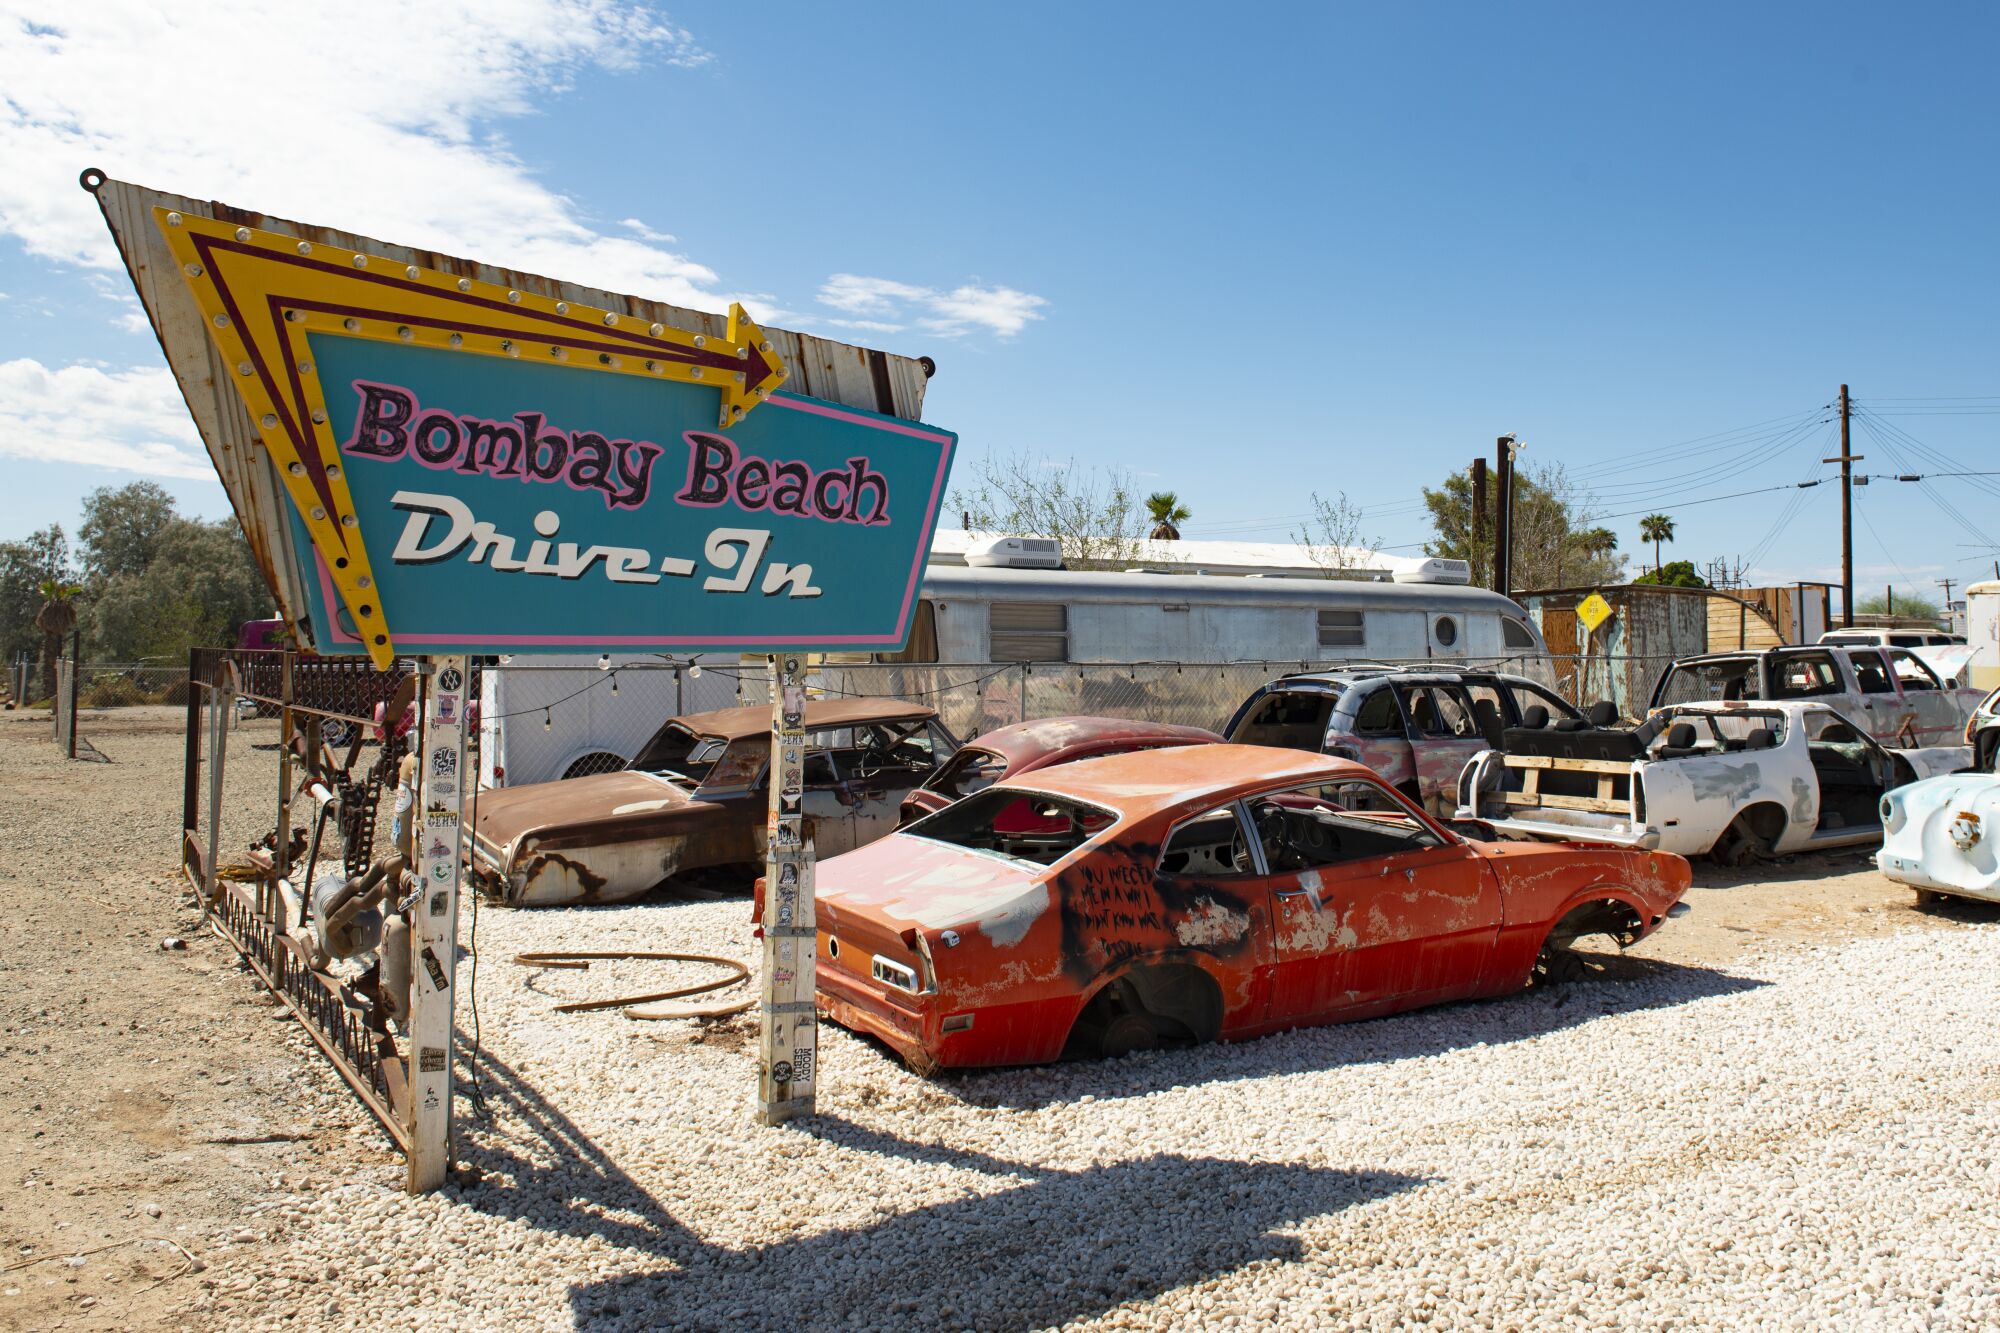 A sign that reads "Bombay Beach Drive-In" looms over dilapidated cars in the lot.